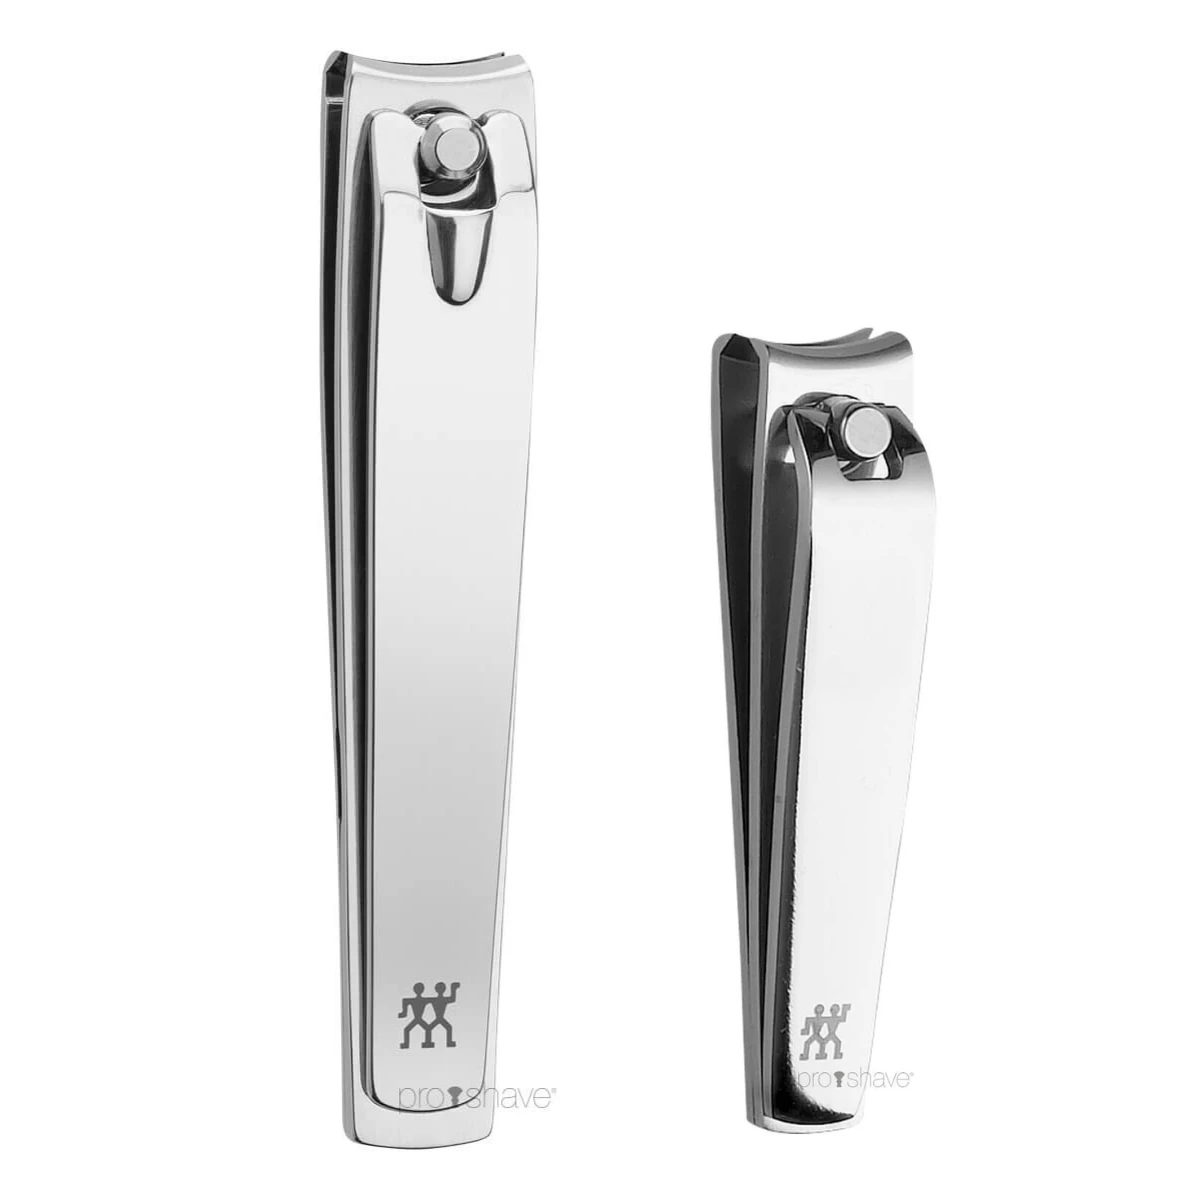 Feather Straight-Edge Toenail Clipper Angled Nail Clippers